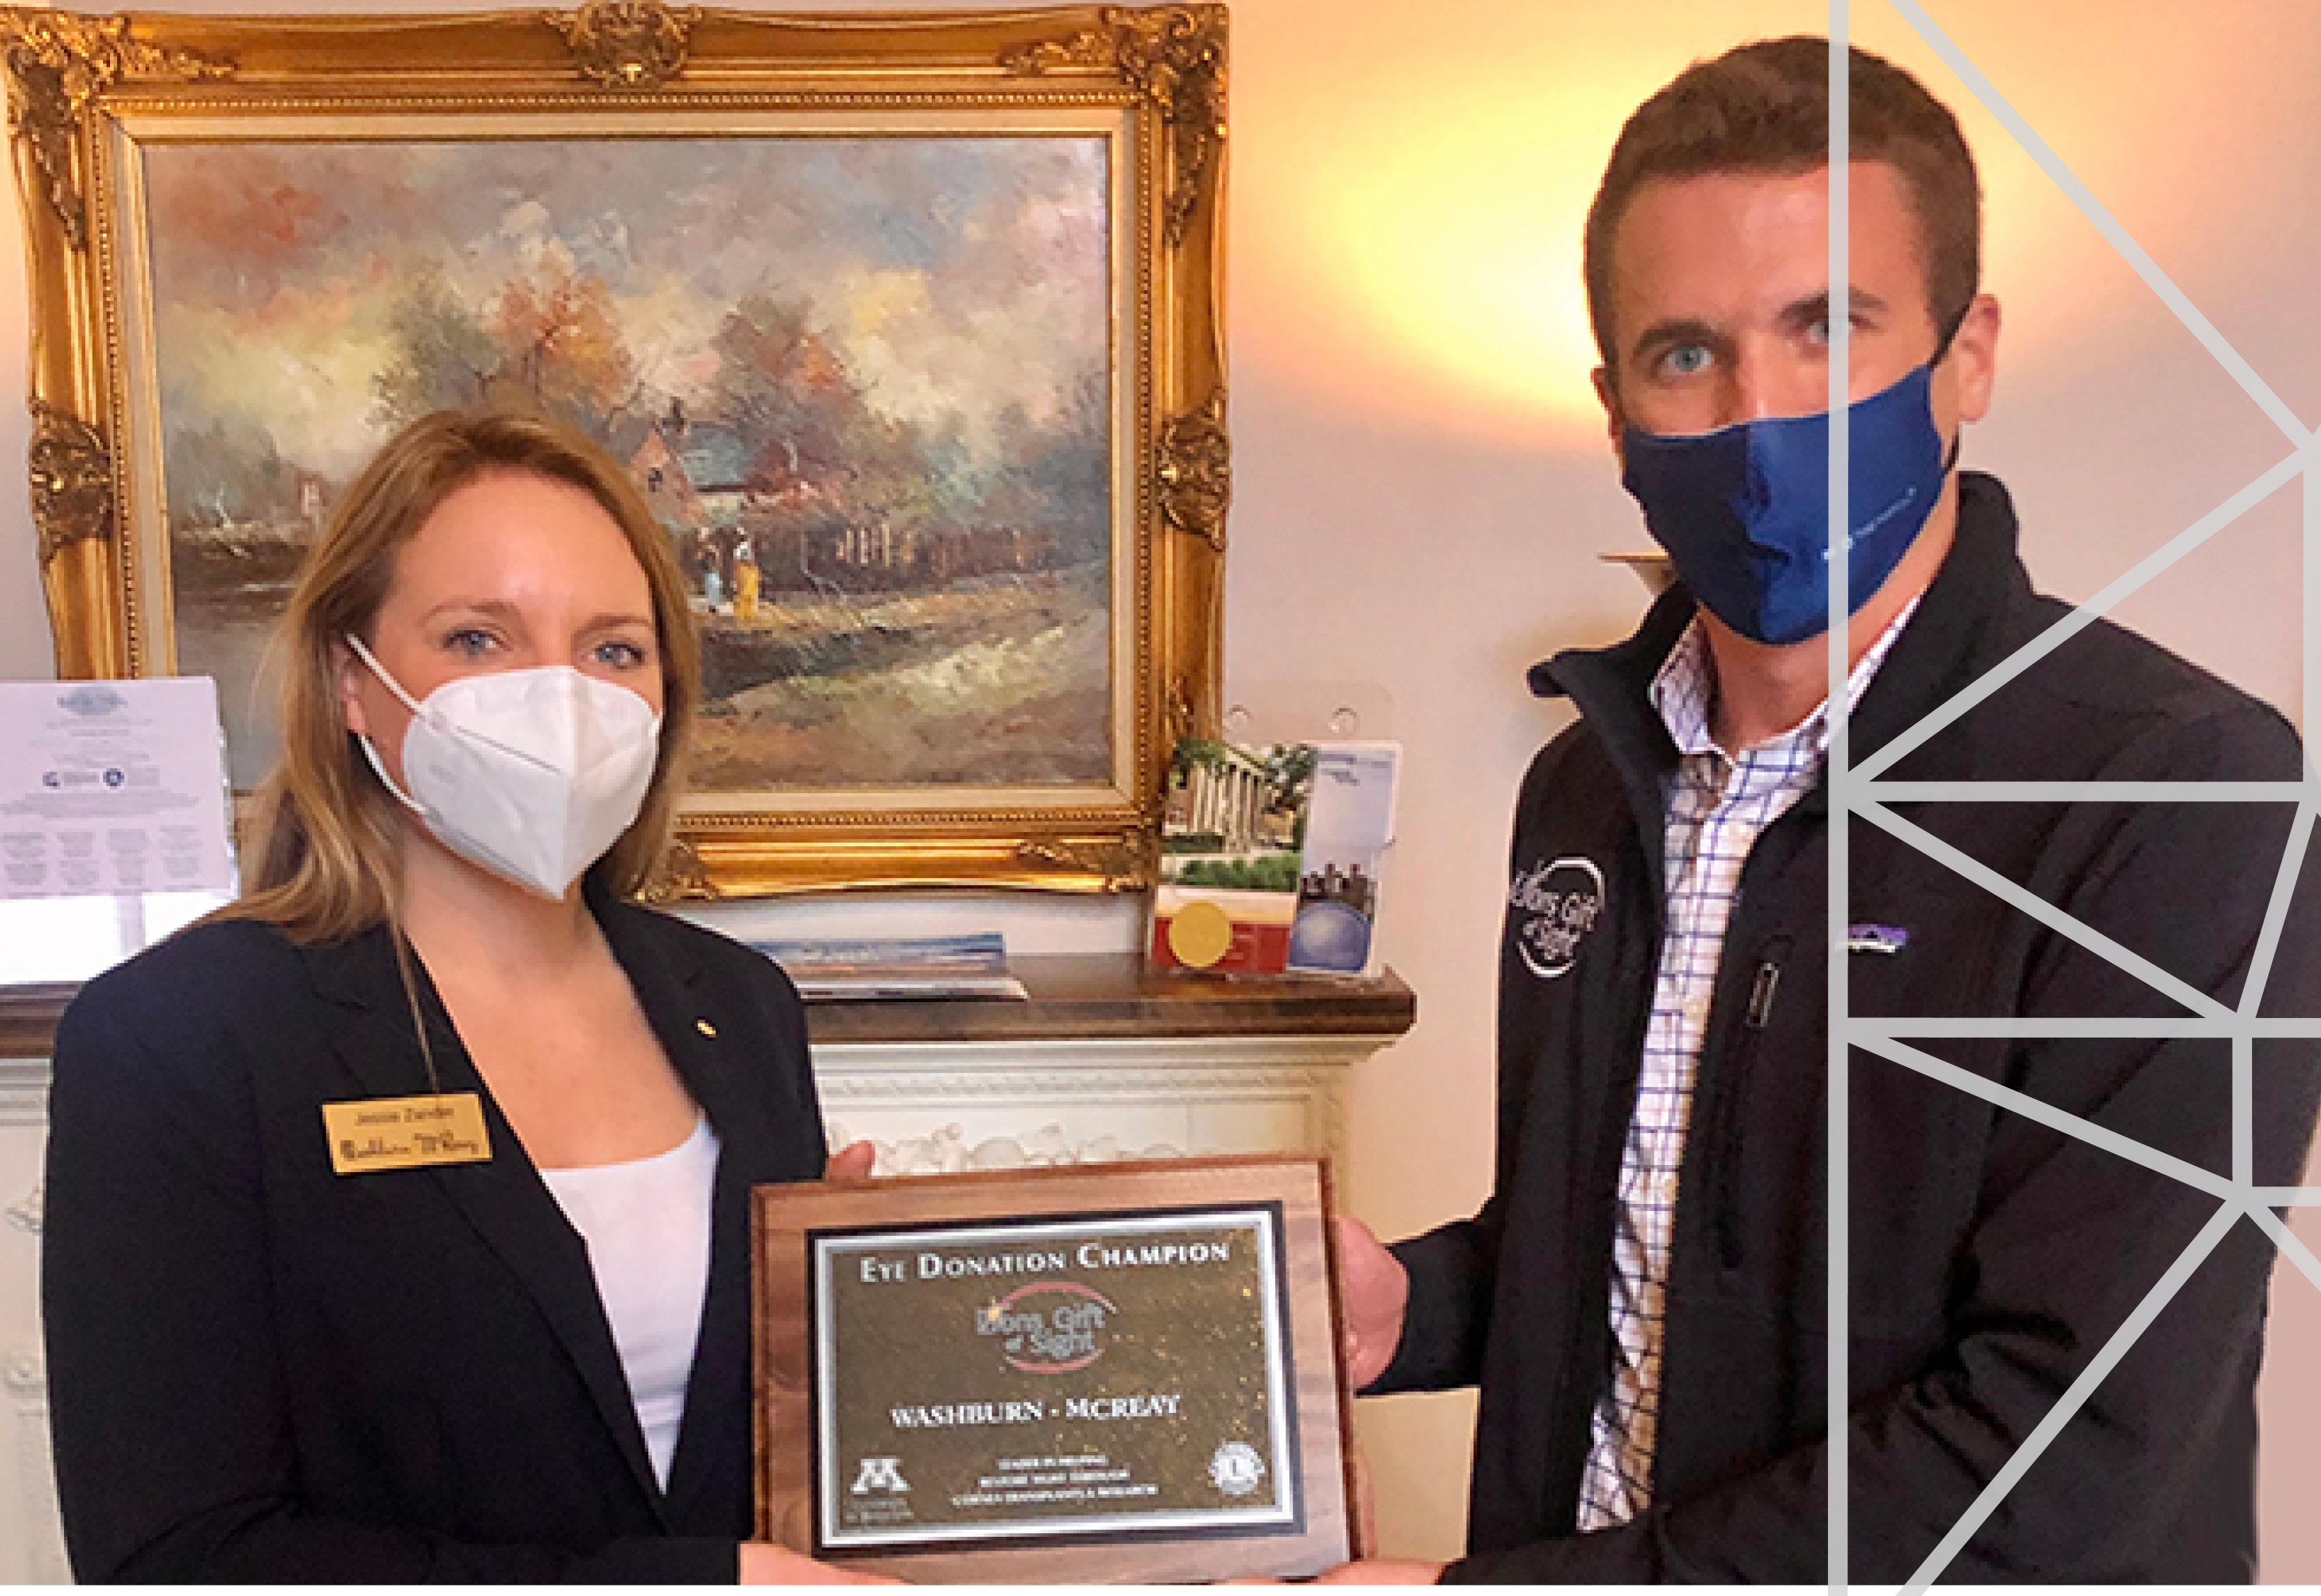 Funeral Director Jessie of Washburn-McReavy and Eye Tissue Recovery Manager Patrick Becker